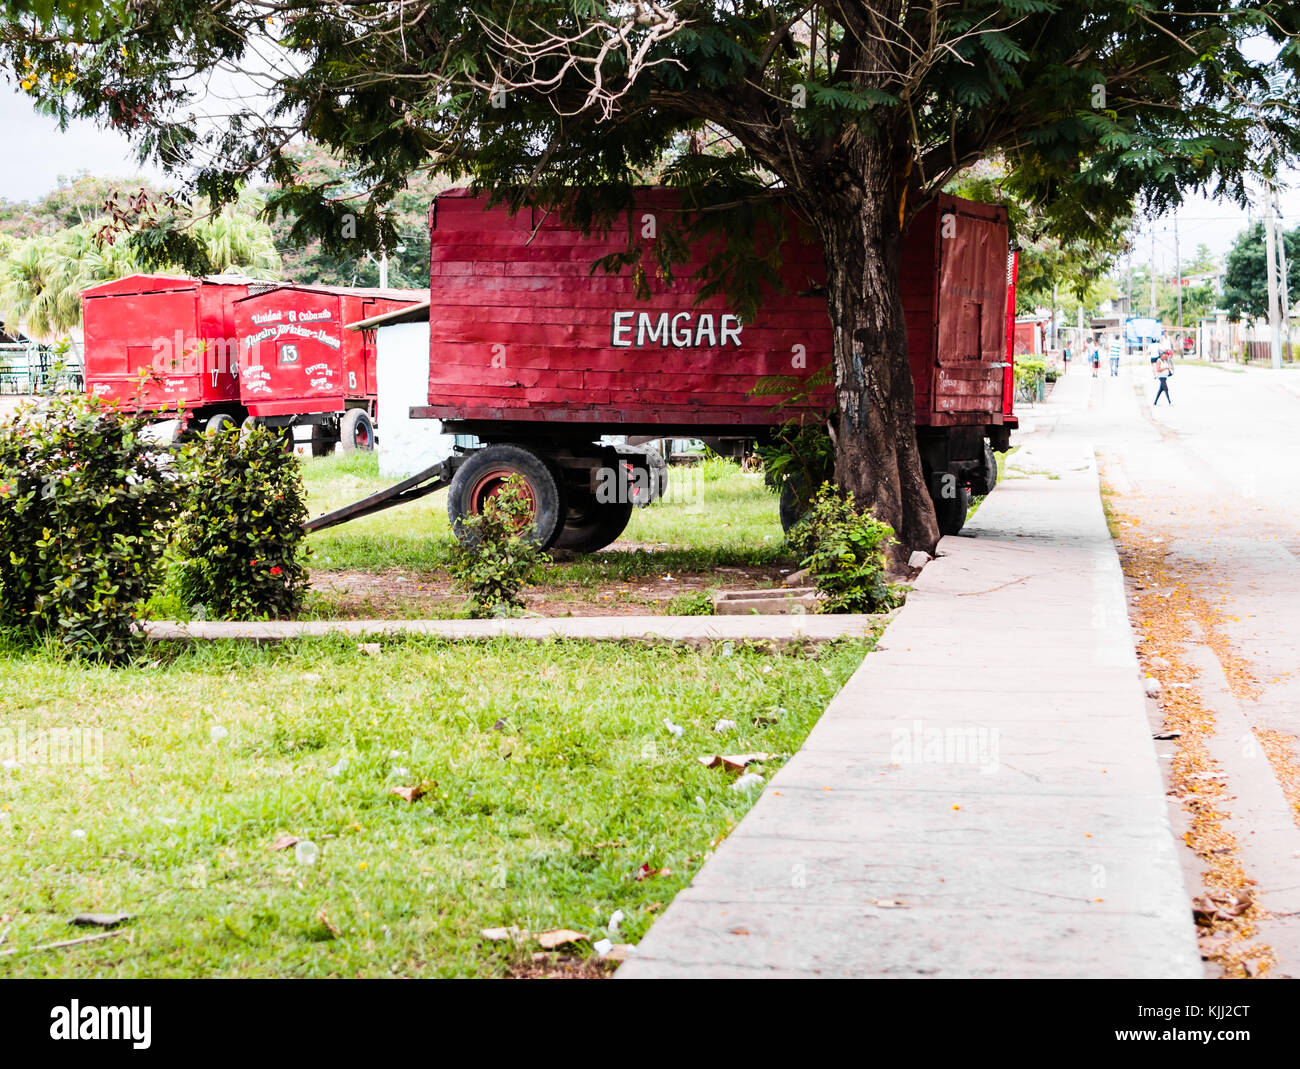 Las Tunas, Cuba - September 2017: Red wagon parked in Fairgrounds Stock Photo